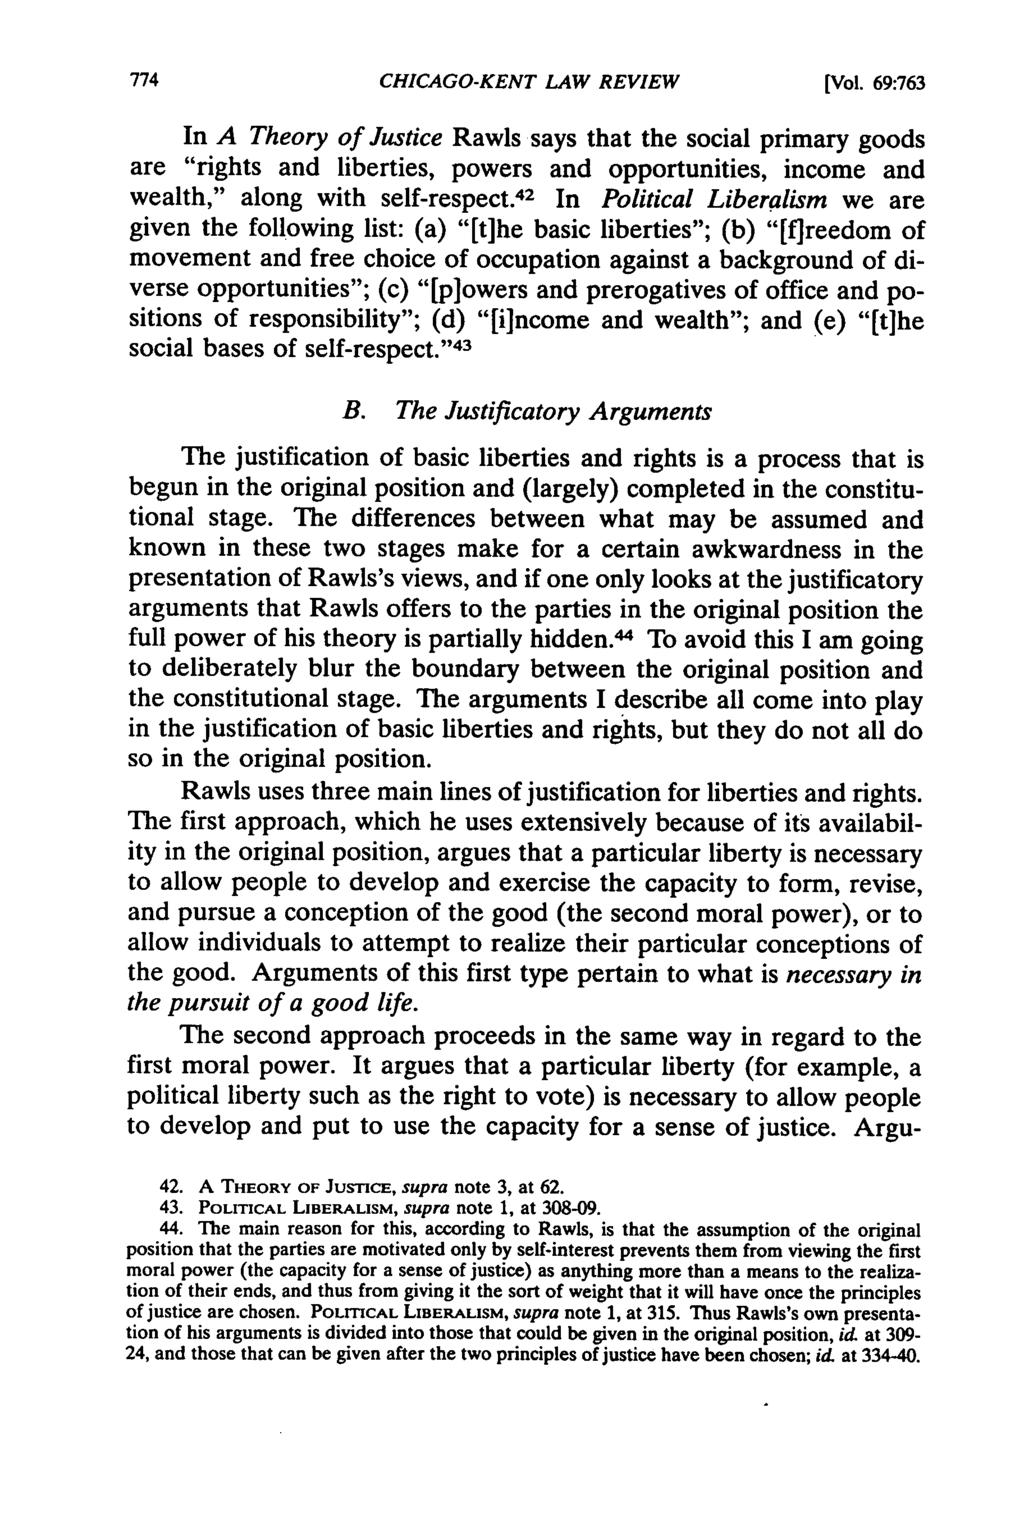 CHICAGO-KENT LAW REVIEW [Vol. 69:763 In A Theory of Justice Rawls says that the social primary goods are "rights and liberties, powers and opportunities, income and wealth," along with self-respect.